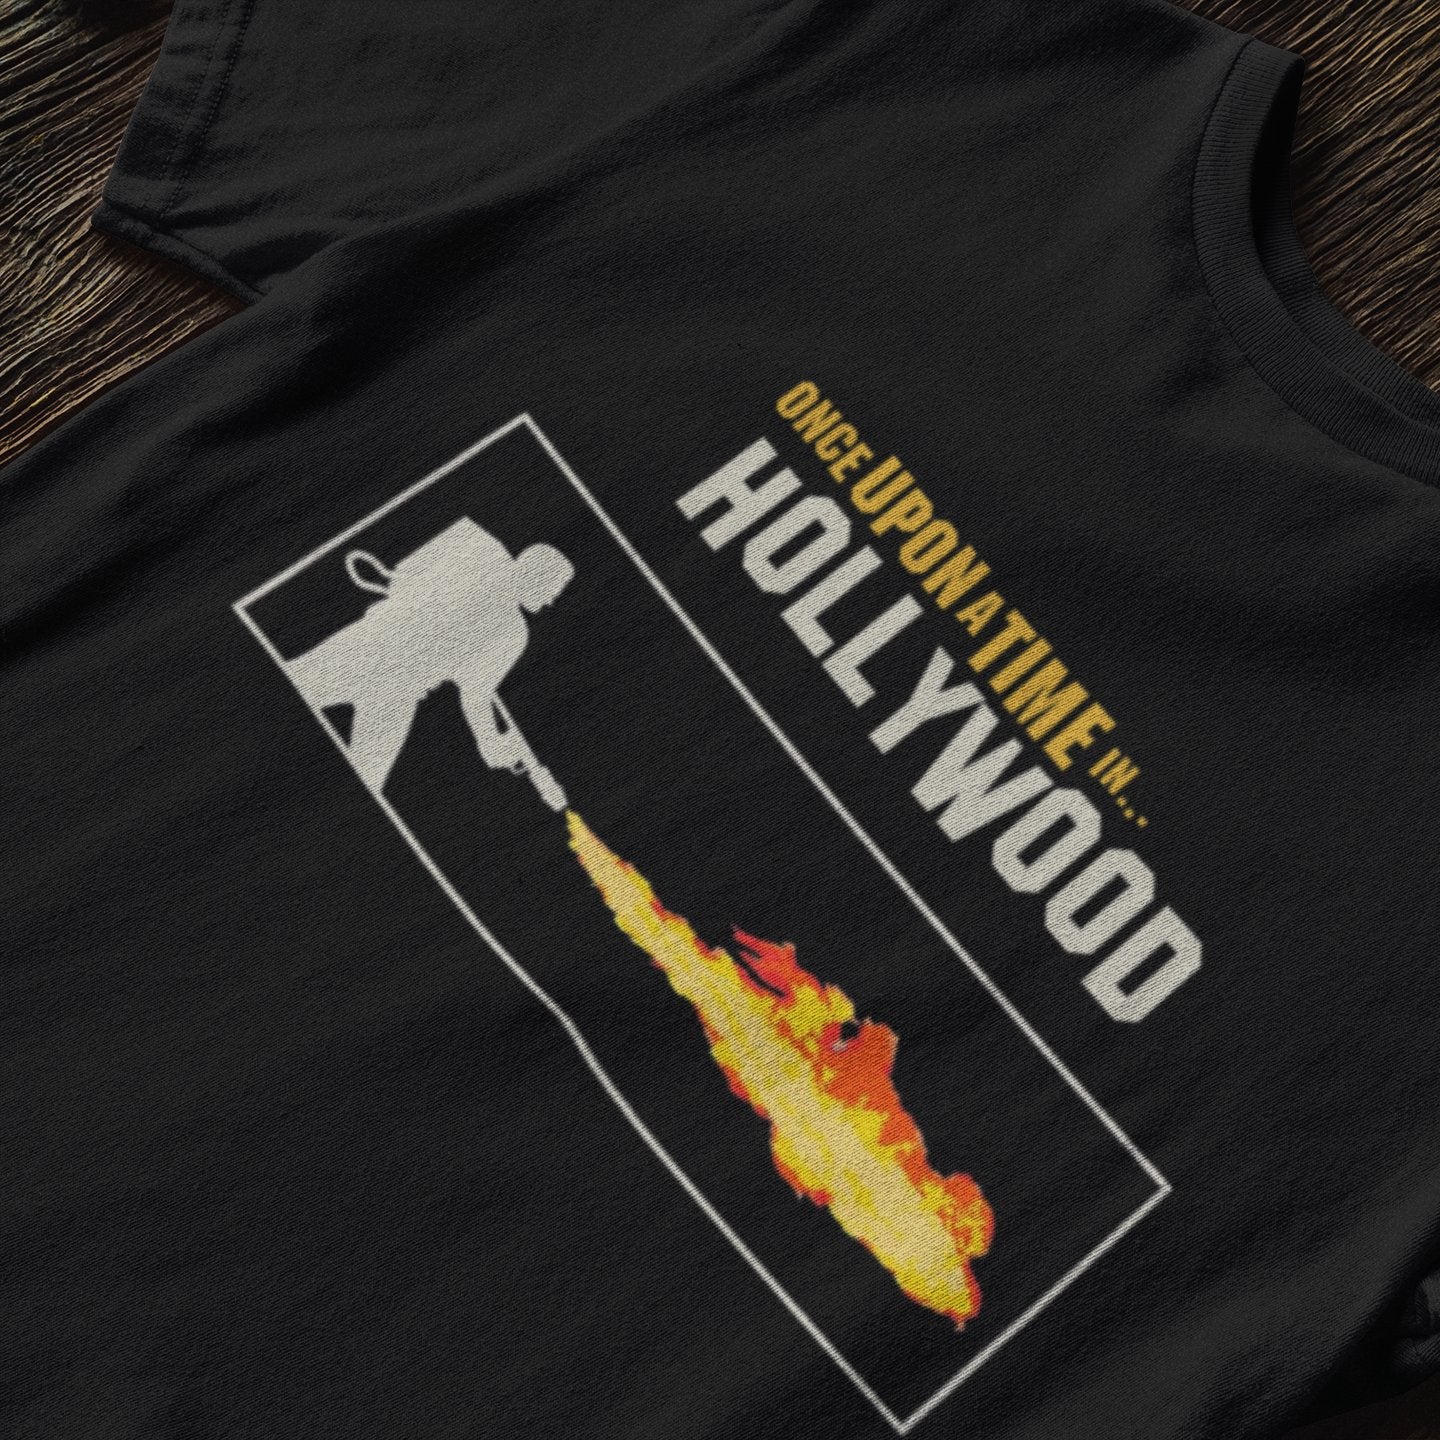 OUATIH Flamethrower Once Upon a Time in Hollywood - T-Shirt